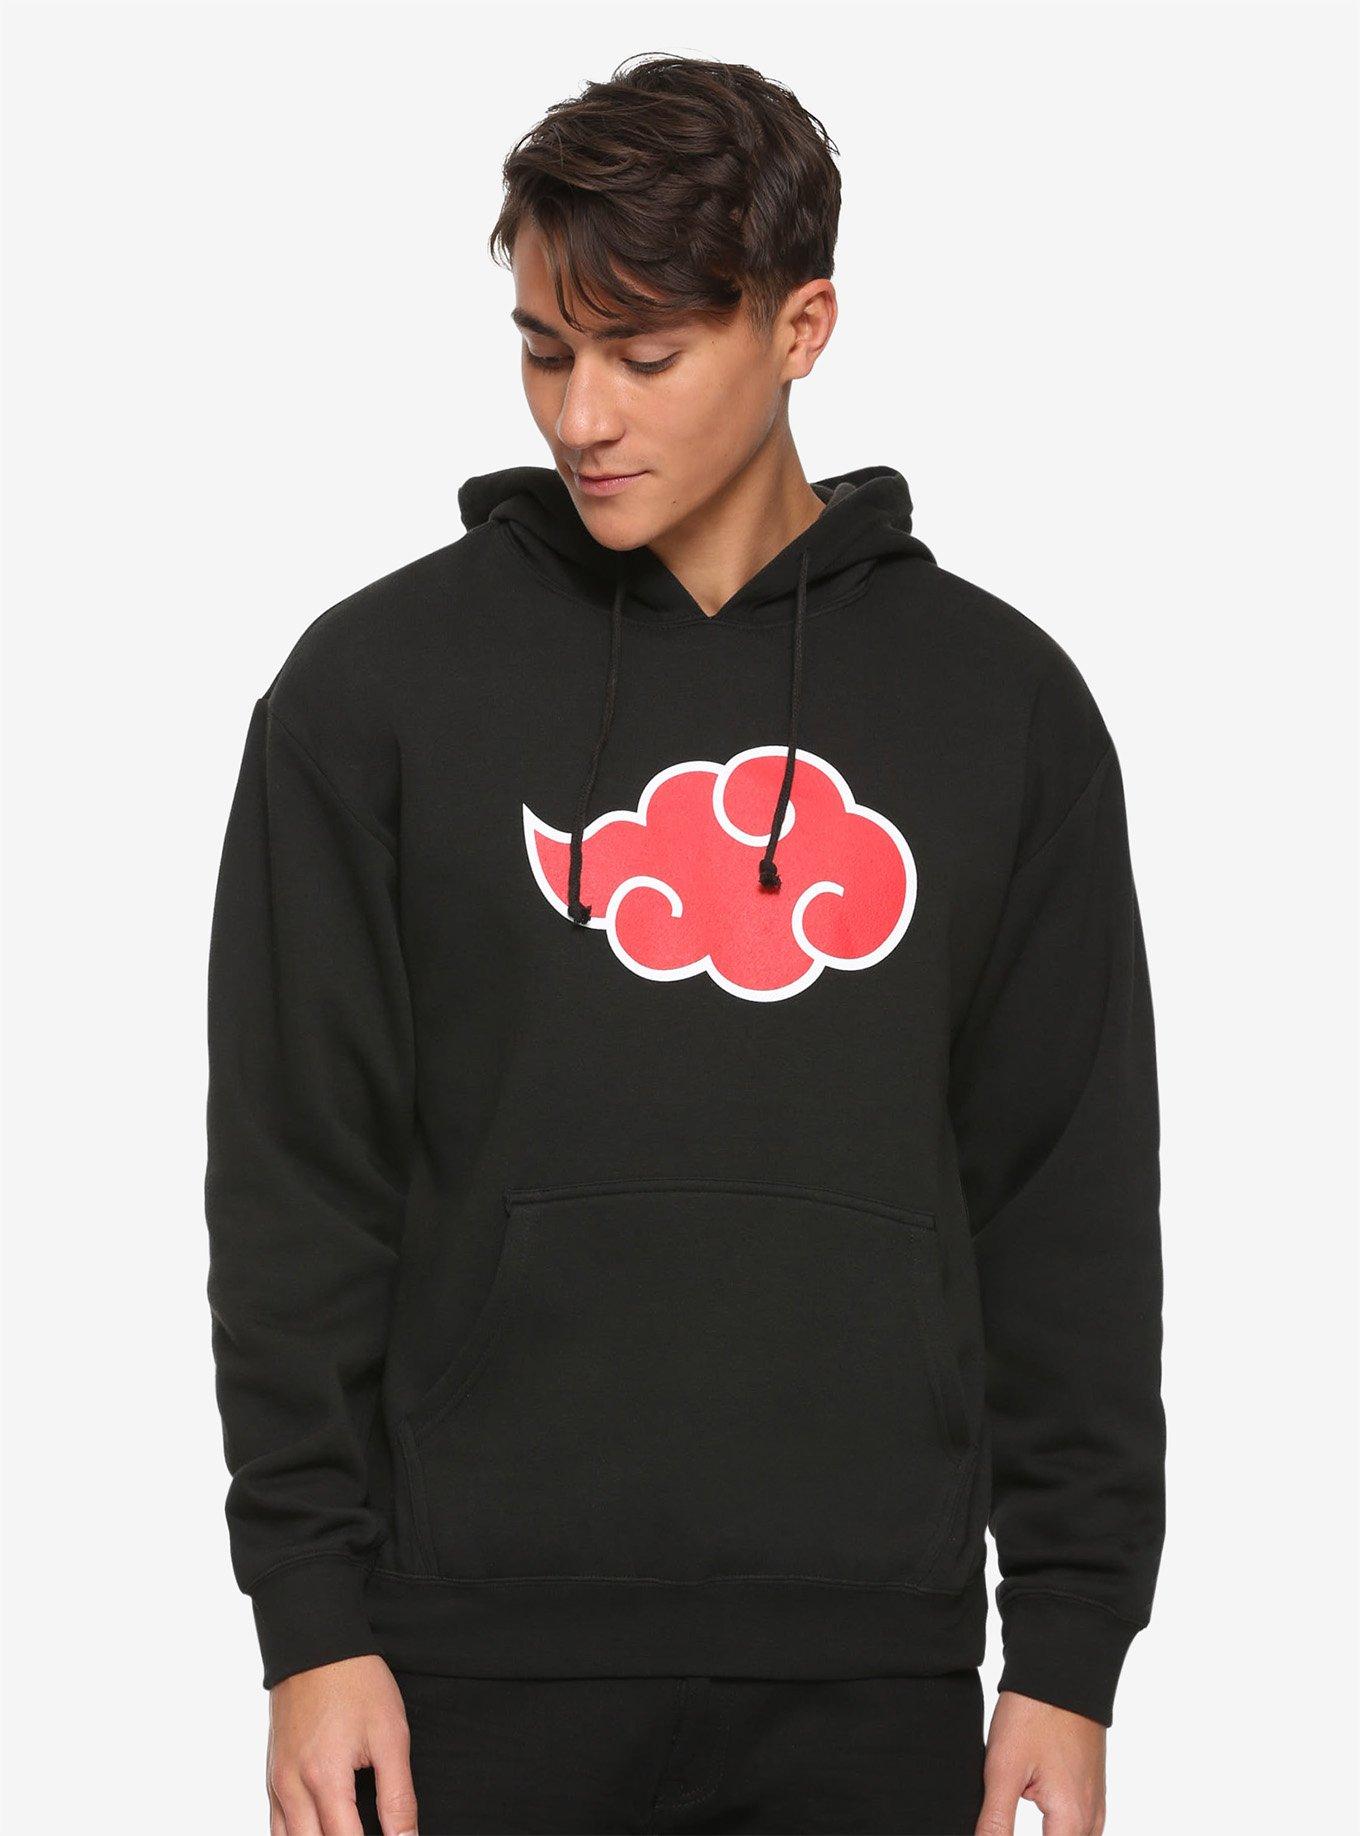 Naruto Shippuden Grid Character Hoodie, RED, hi-res